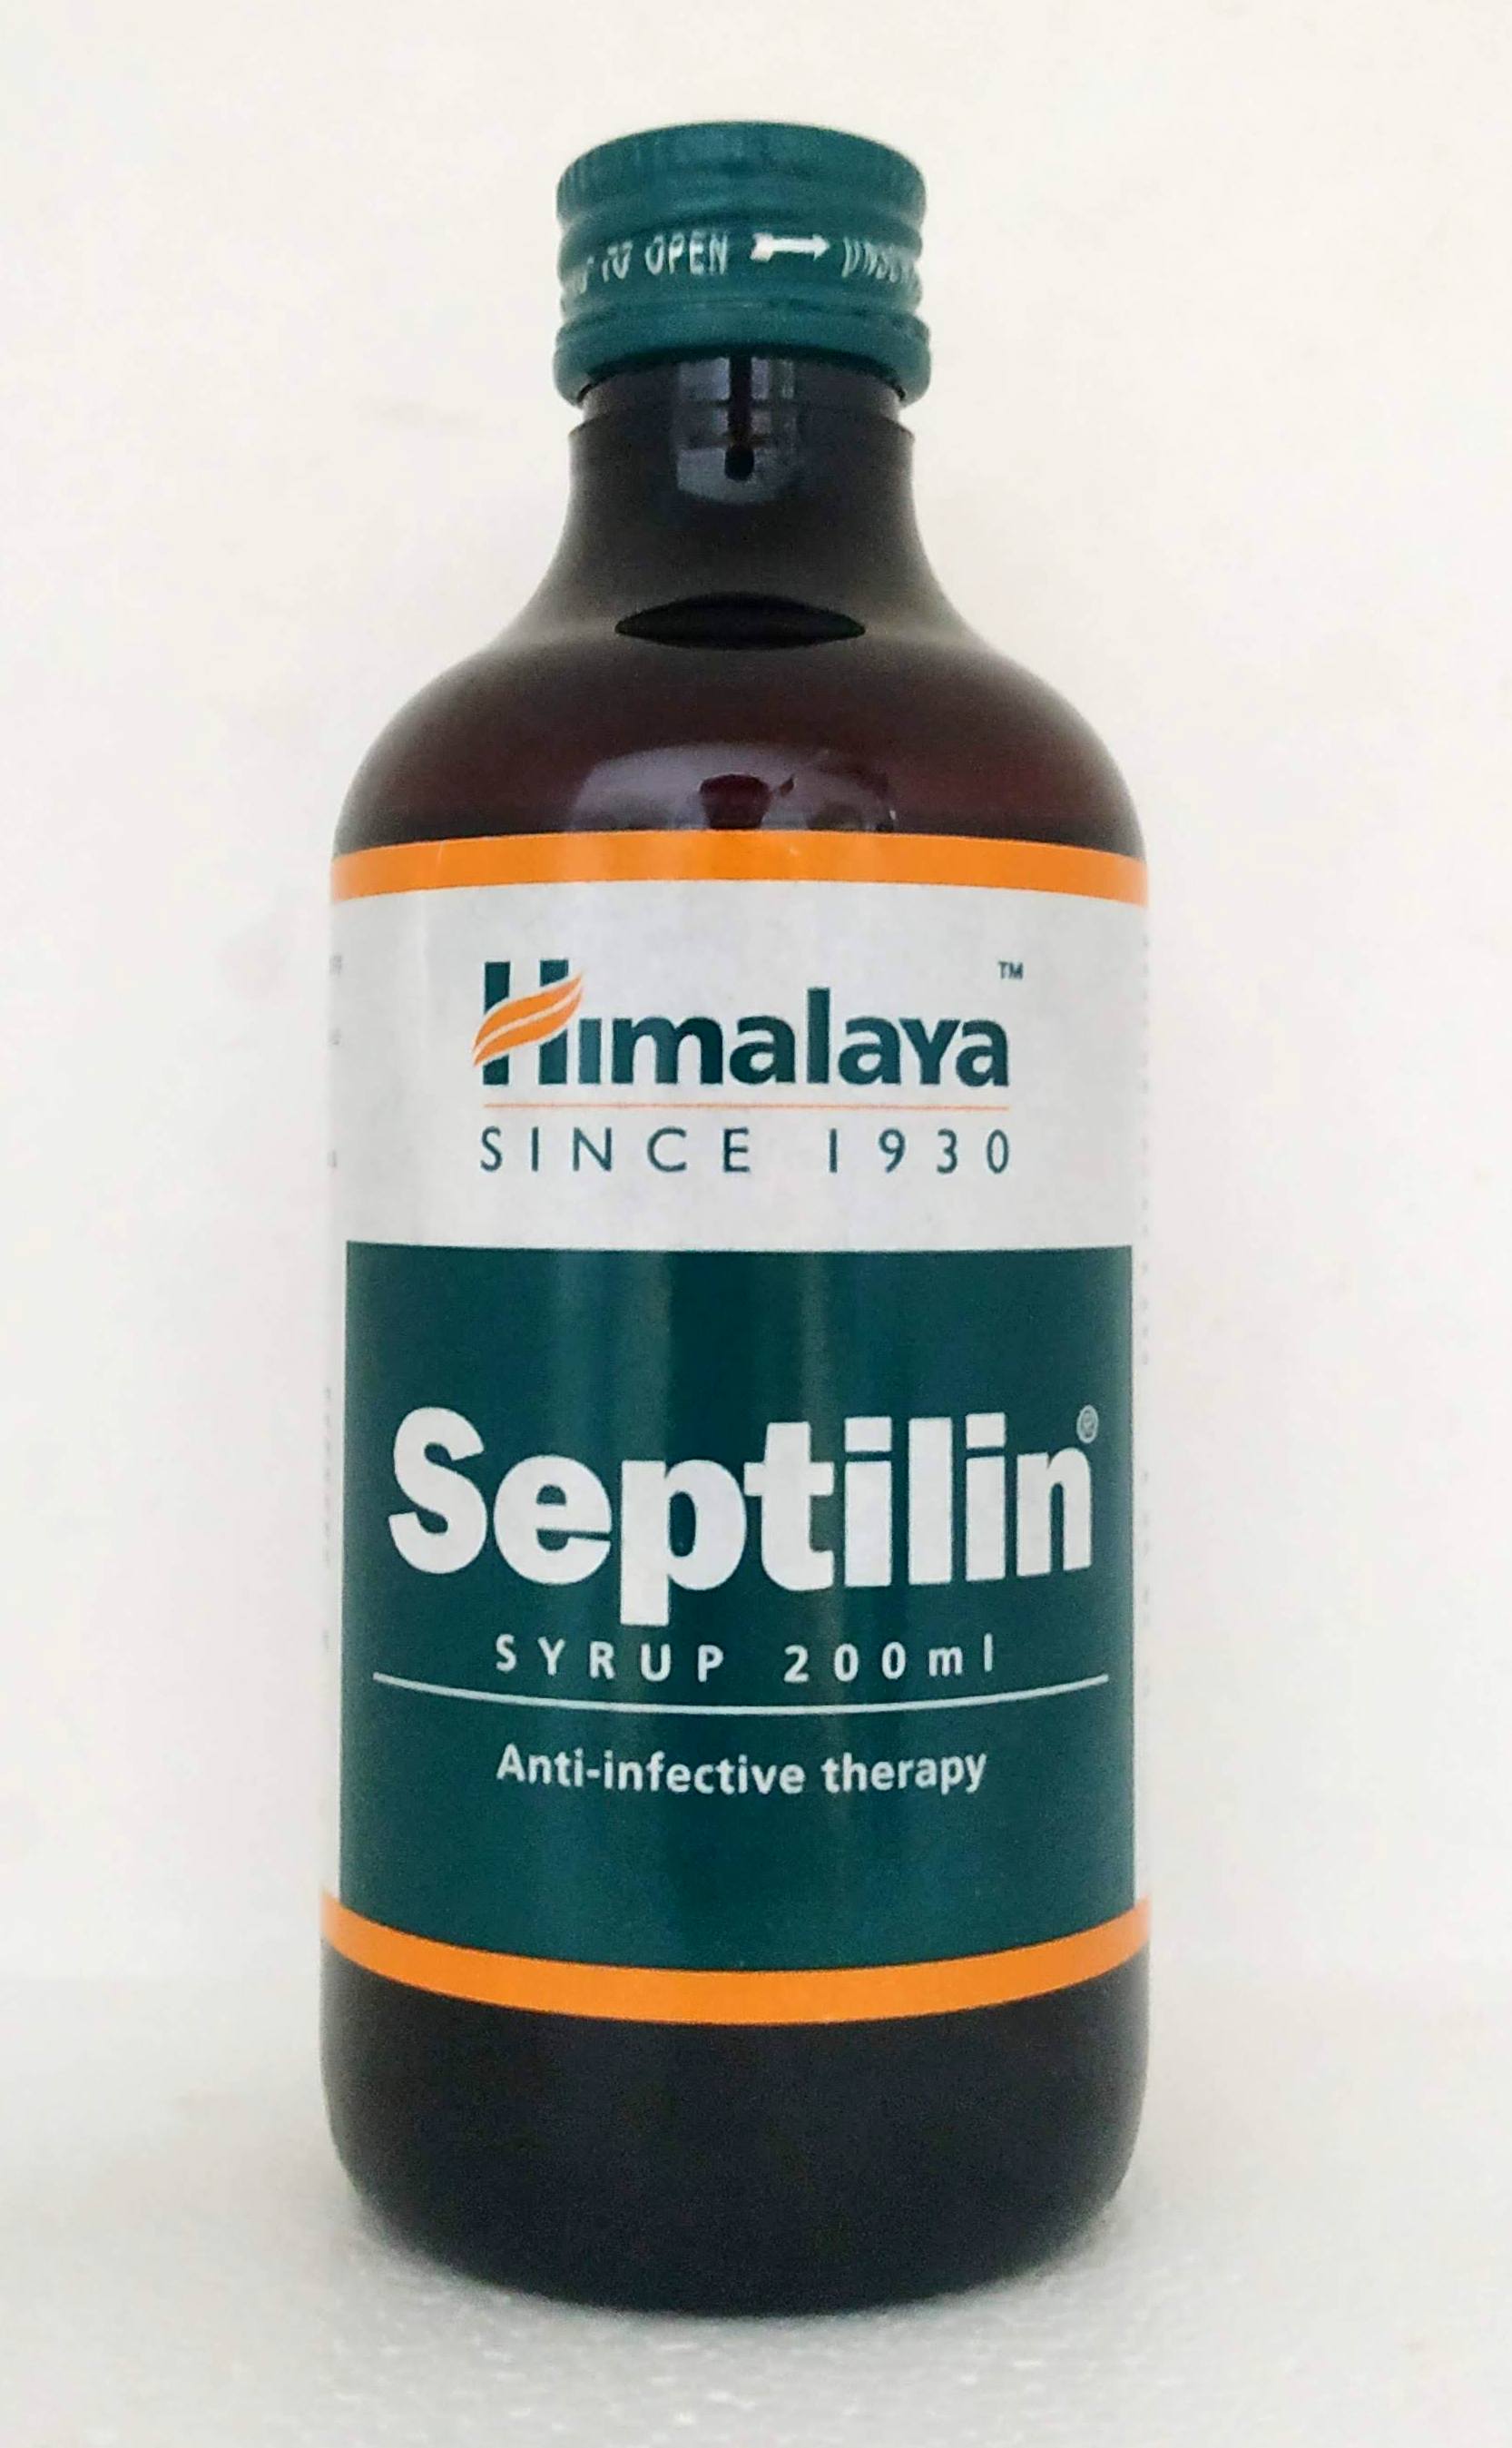 Shop Septilin Syrup 200ml at price 130.00 from Himalaya Online - Ayush Care